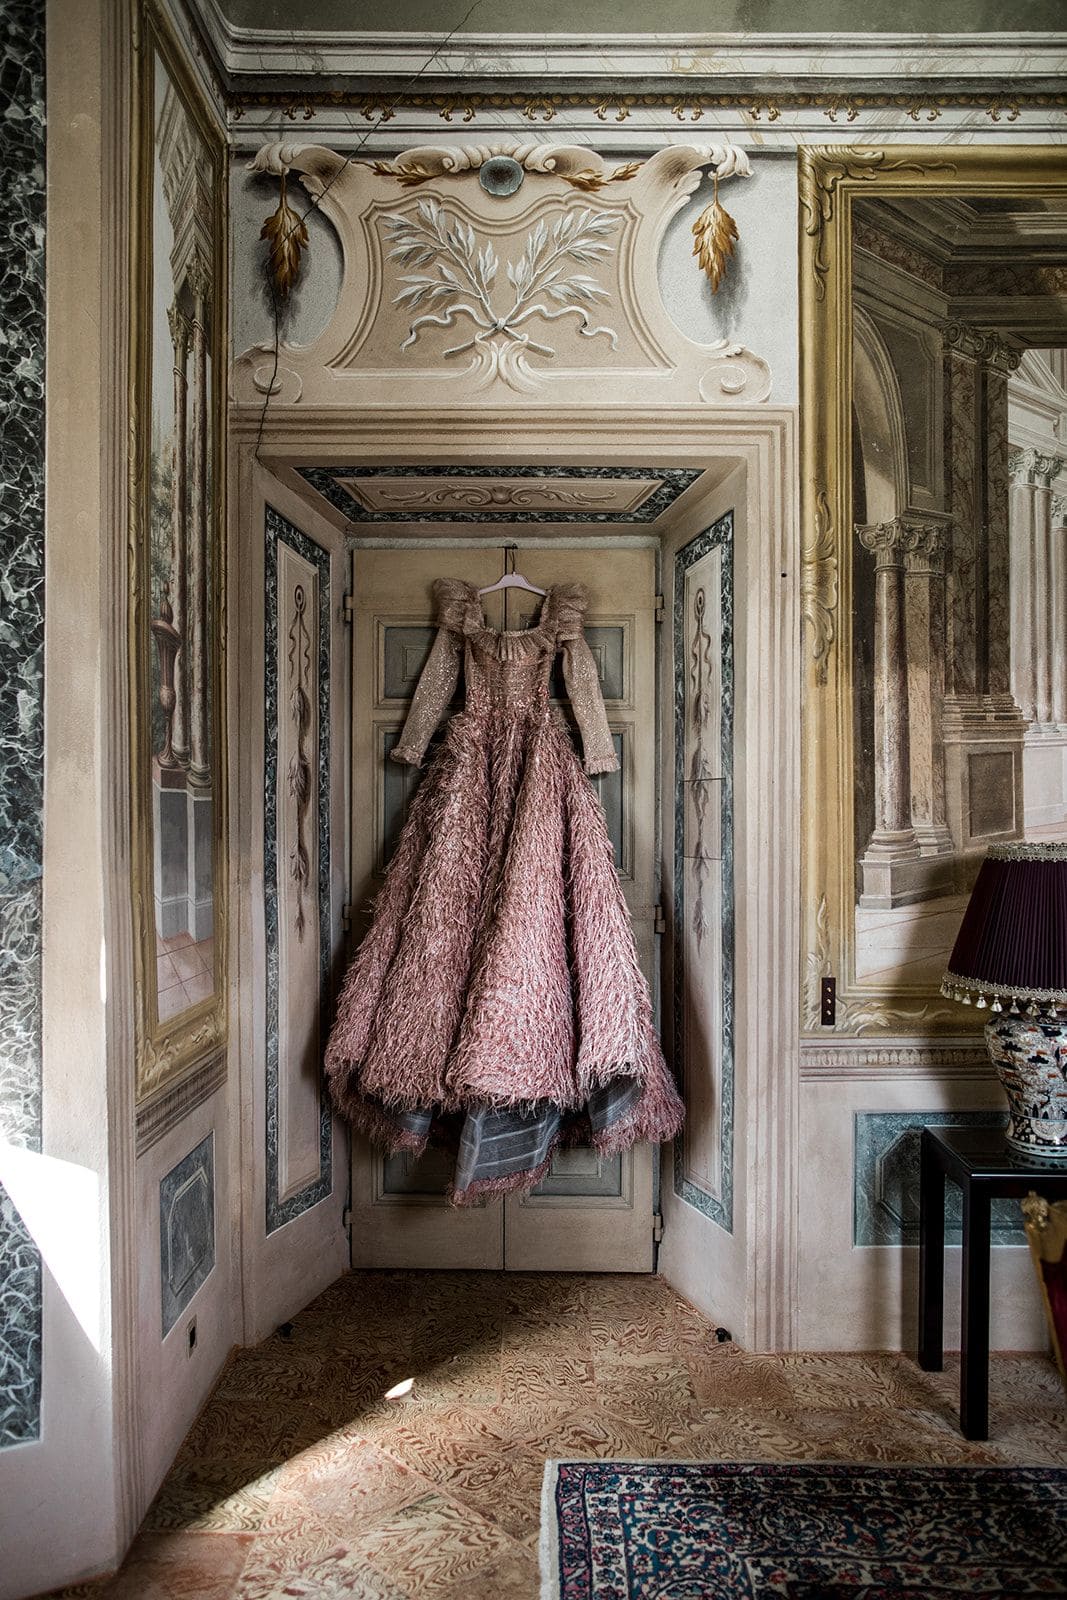 Couture gown hangs on doorway amidst Villa Balbiano's ornate architecture